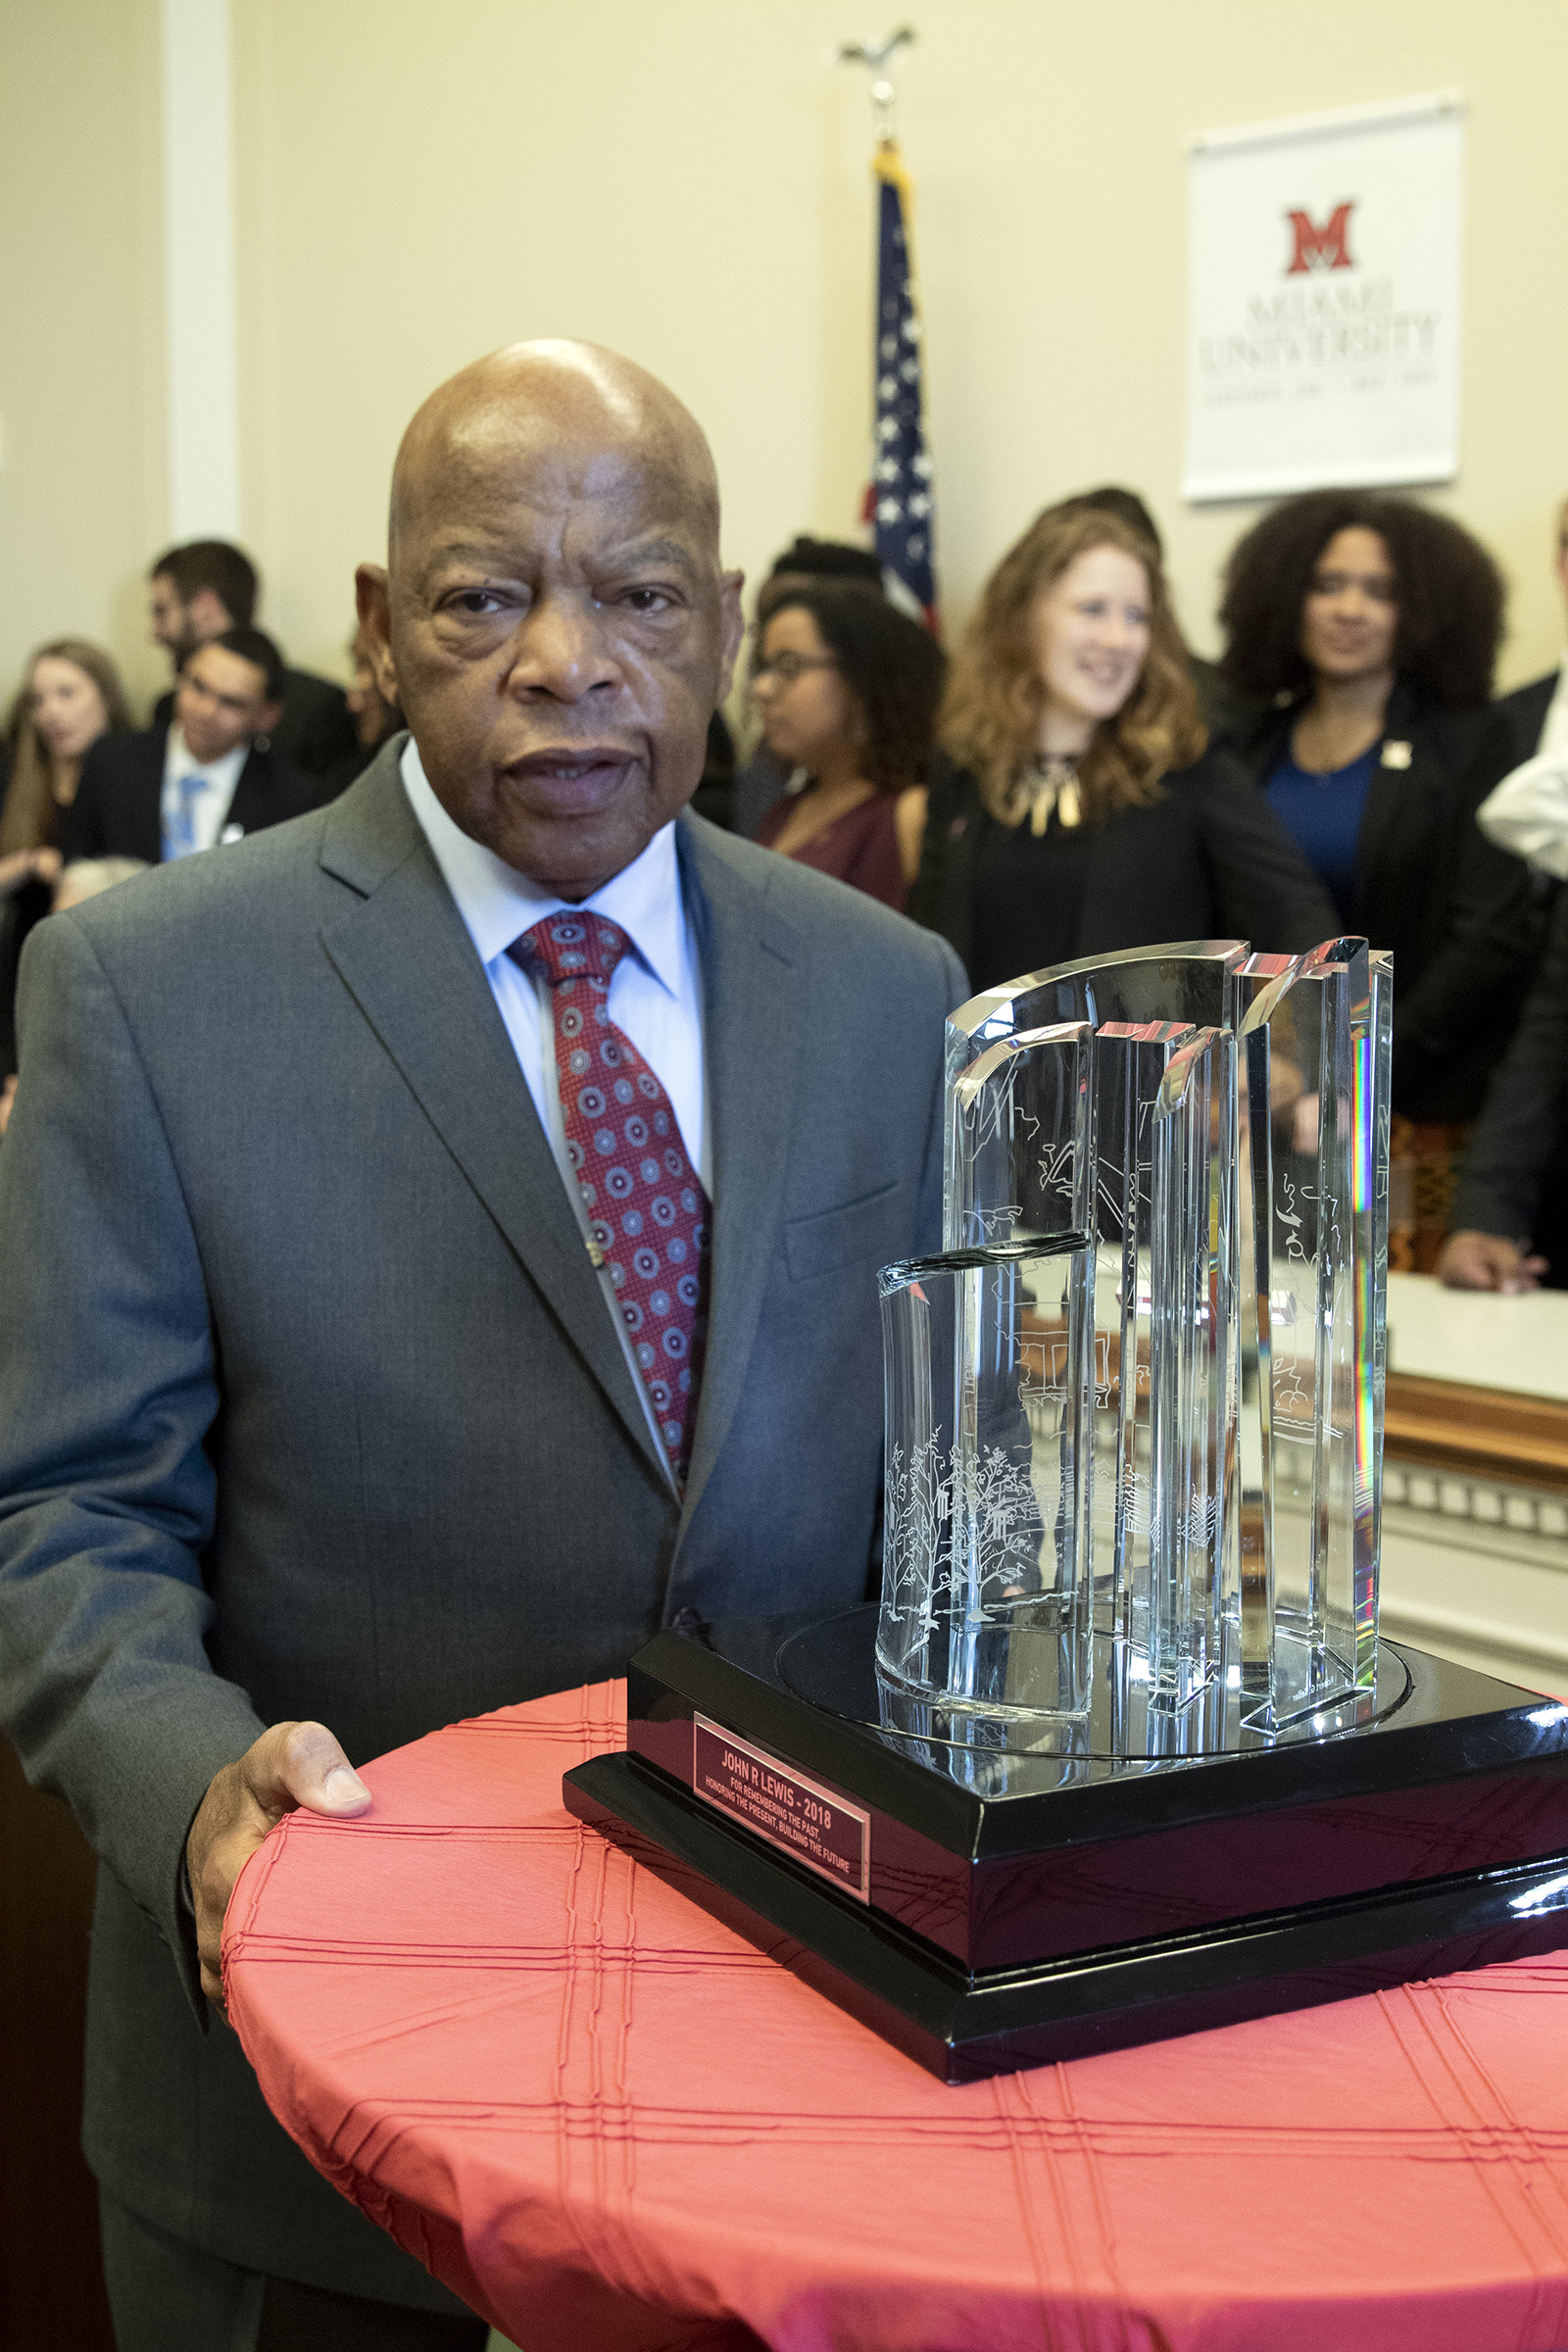 John Lewis Freedom Summer Award. Photograph by Jeff Sabo. United States Representative John Lewis receives The Freedom Sumer of ©64 Award in 2018. The Freedom Summer of ©64 Award was created to honor champions of civil rights and social justice. It is given in remembrance and recognition of the site at the Western College for Women (now part of Miami University), where 800 young Americans trained to register black voters in the south. Other recipients of this award include the Mt. Zion United Methodist Church, Dr. Carolyn Jefferson-Jenkins, Joe Madison, Wayne and Teresa Embry, and Reginald Hudlin. © 2018, Miami University.